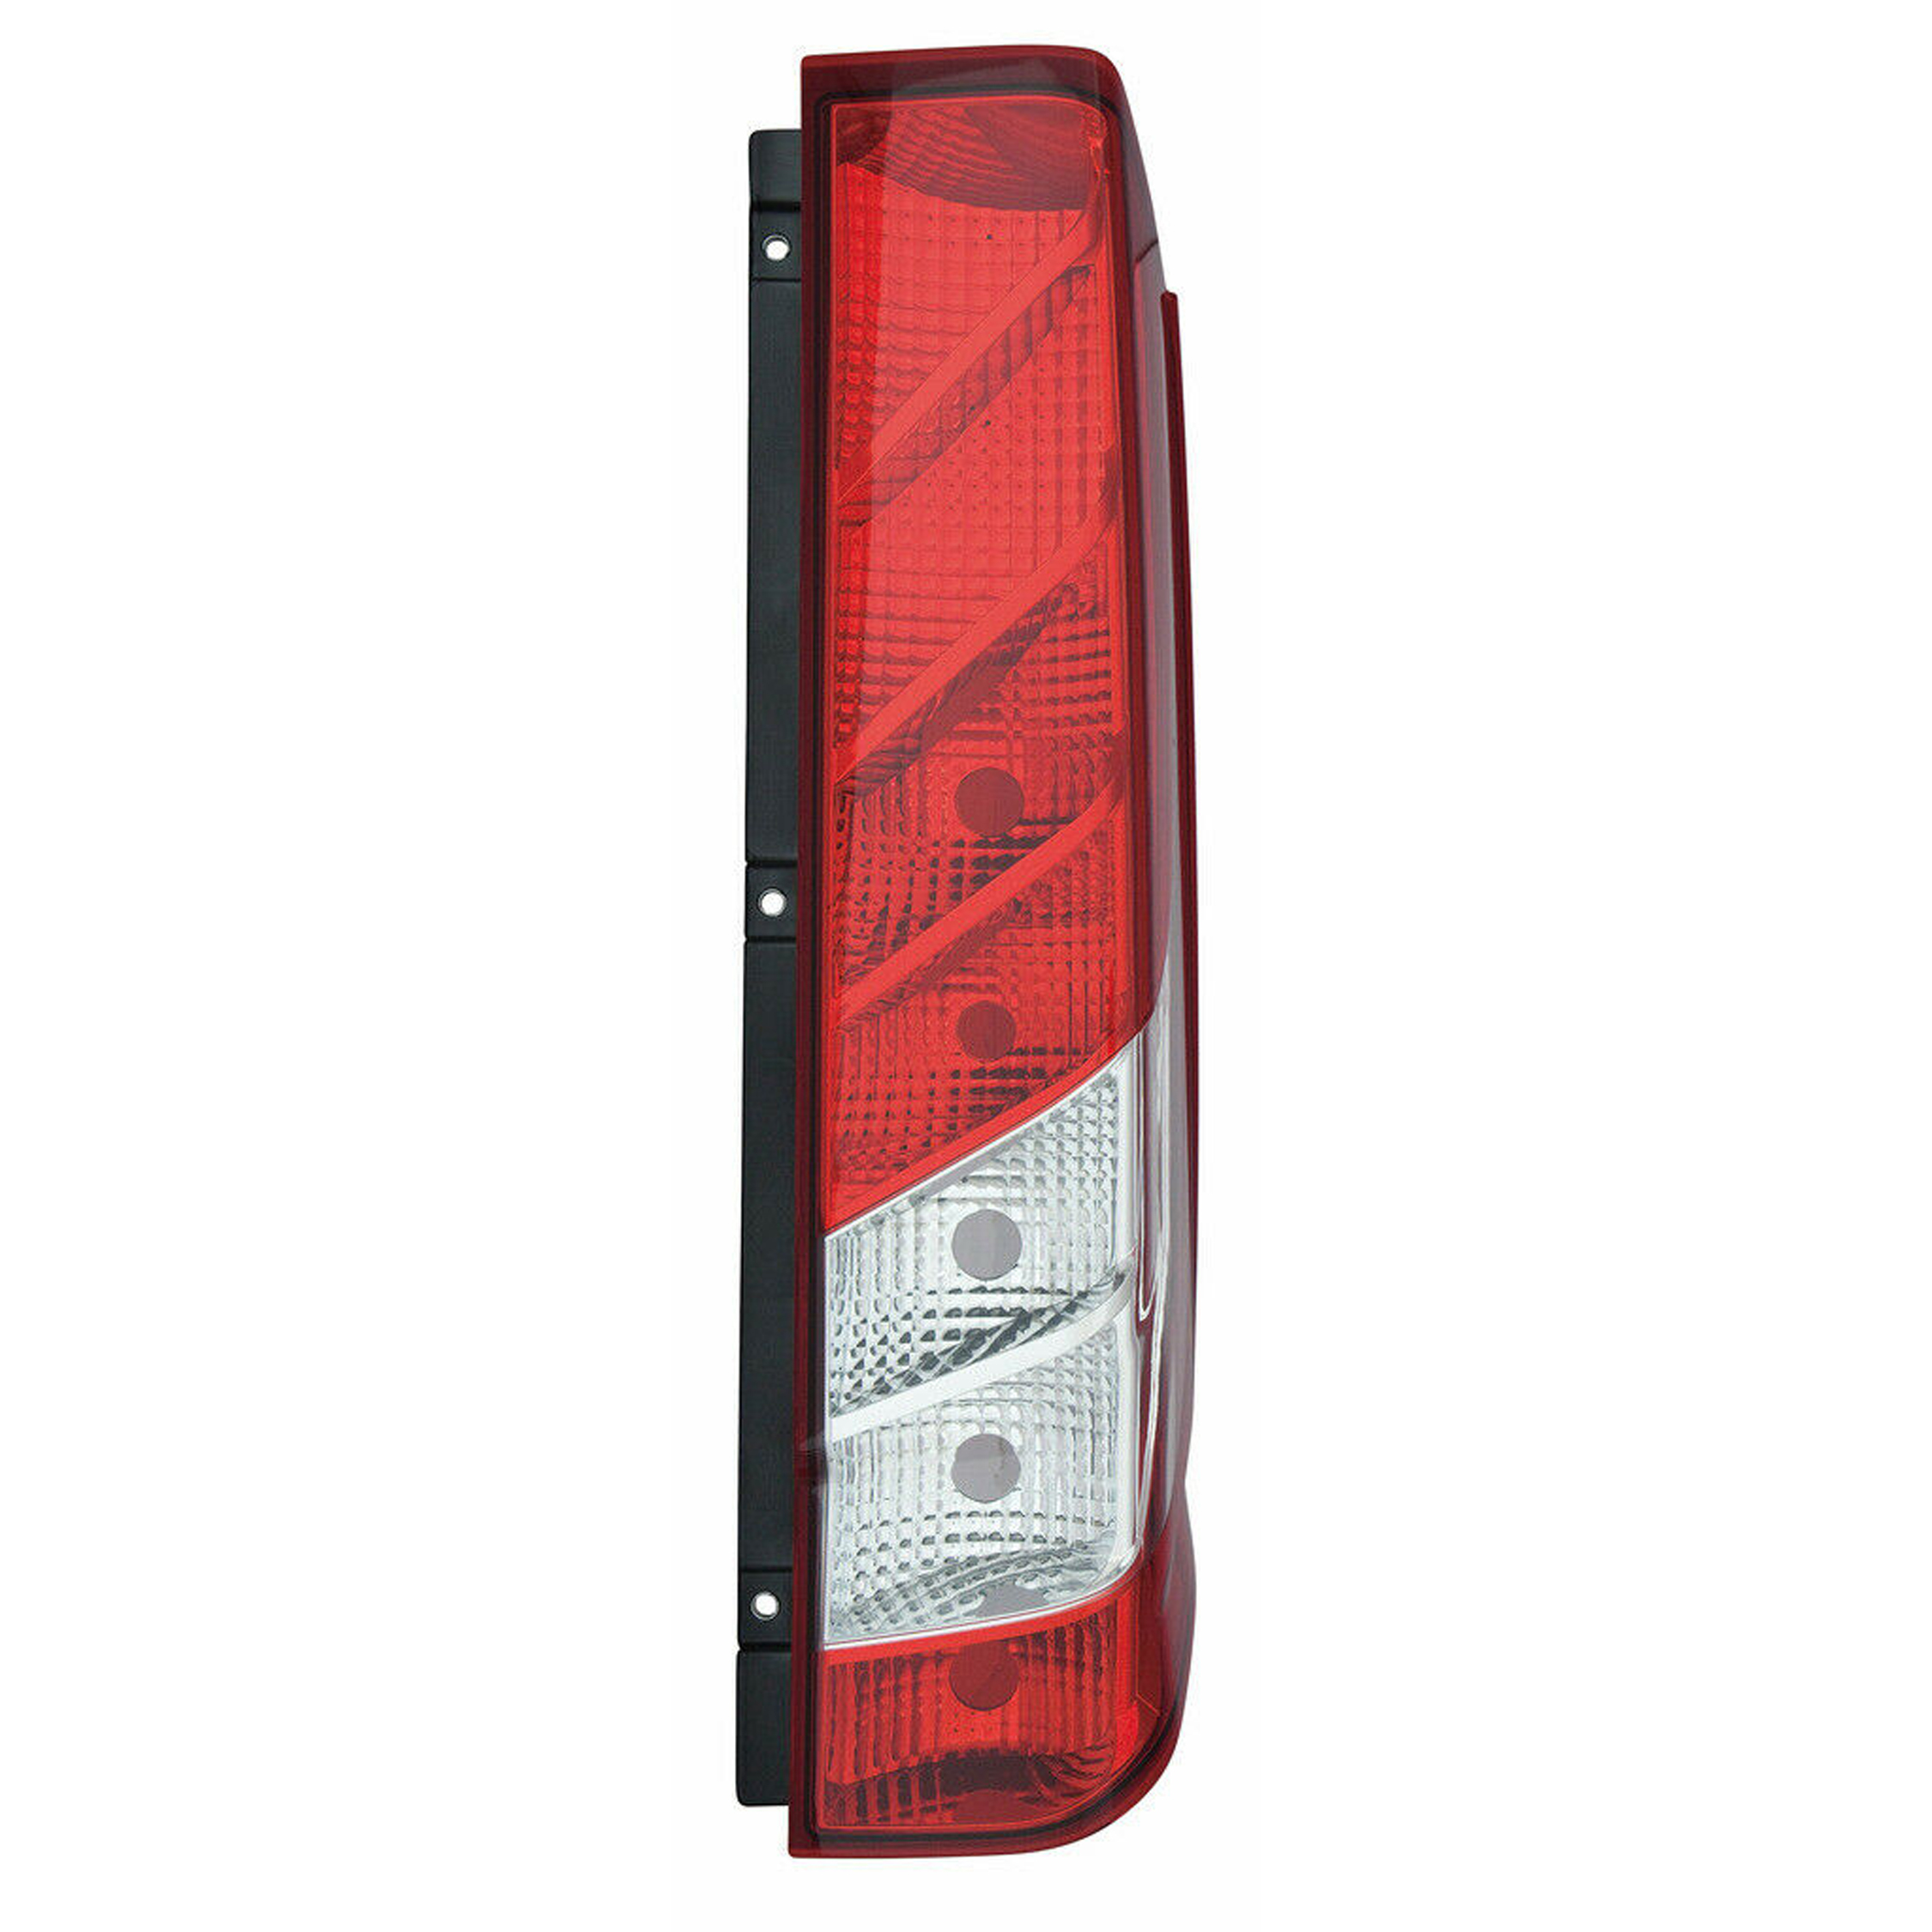 IVECO Daily CHASSIS CAB VAN REAR LAMP LIGHT RIGHT HAND ( UK Driver Side ) 2006 APR to 2014 – REAR LAMP LIGHT